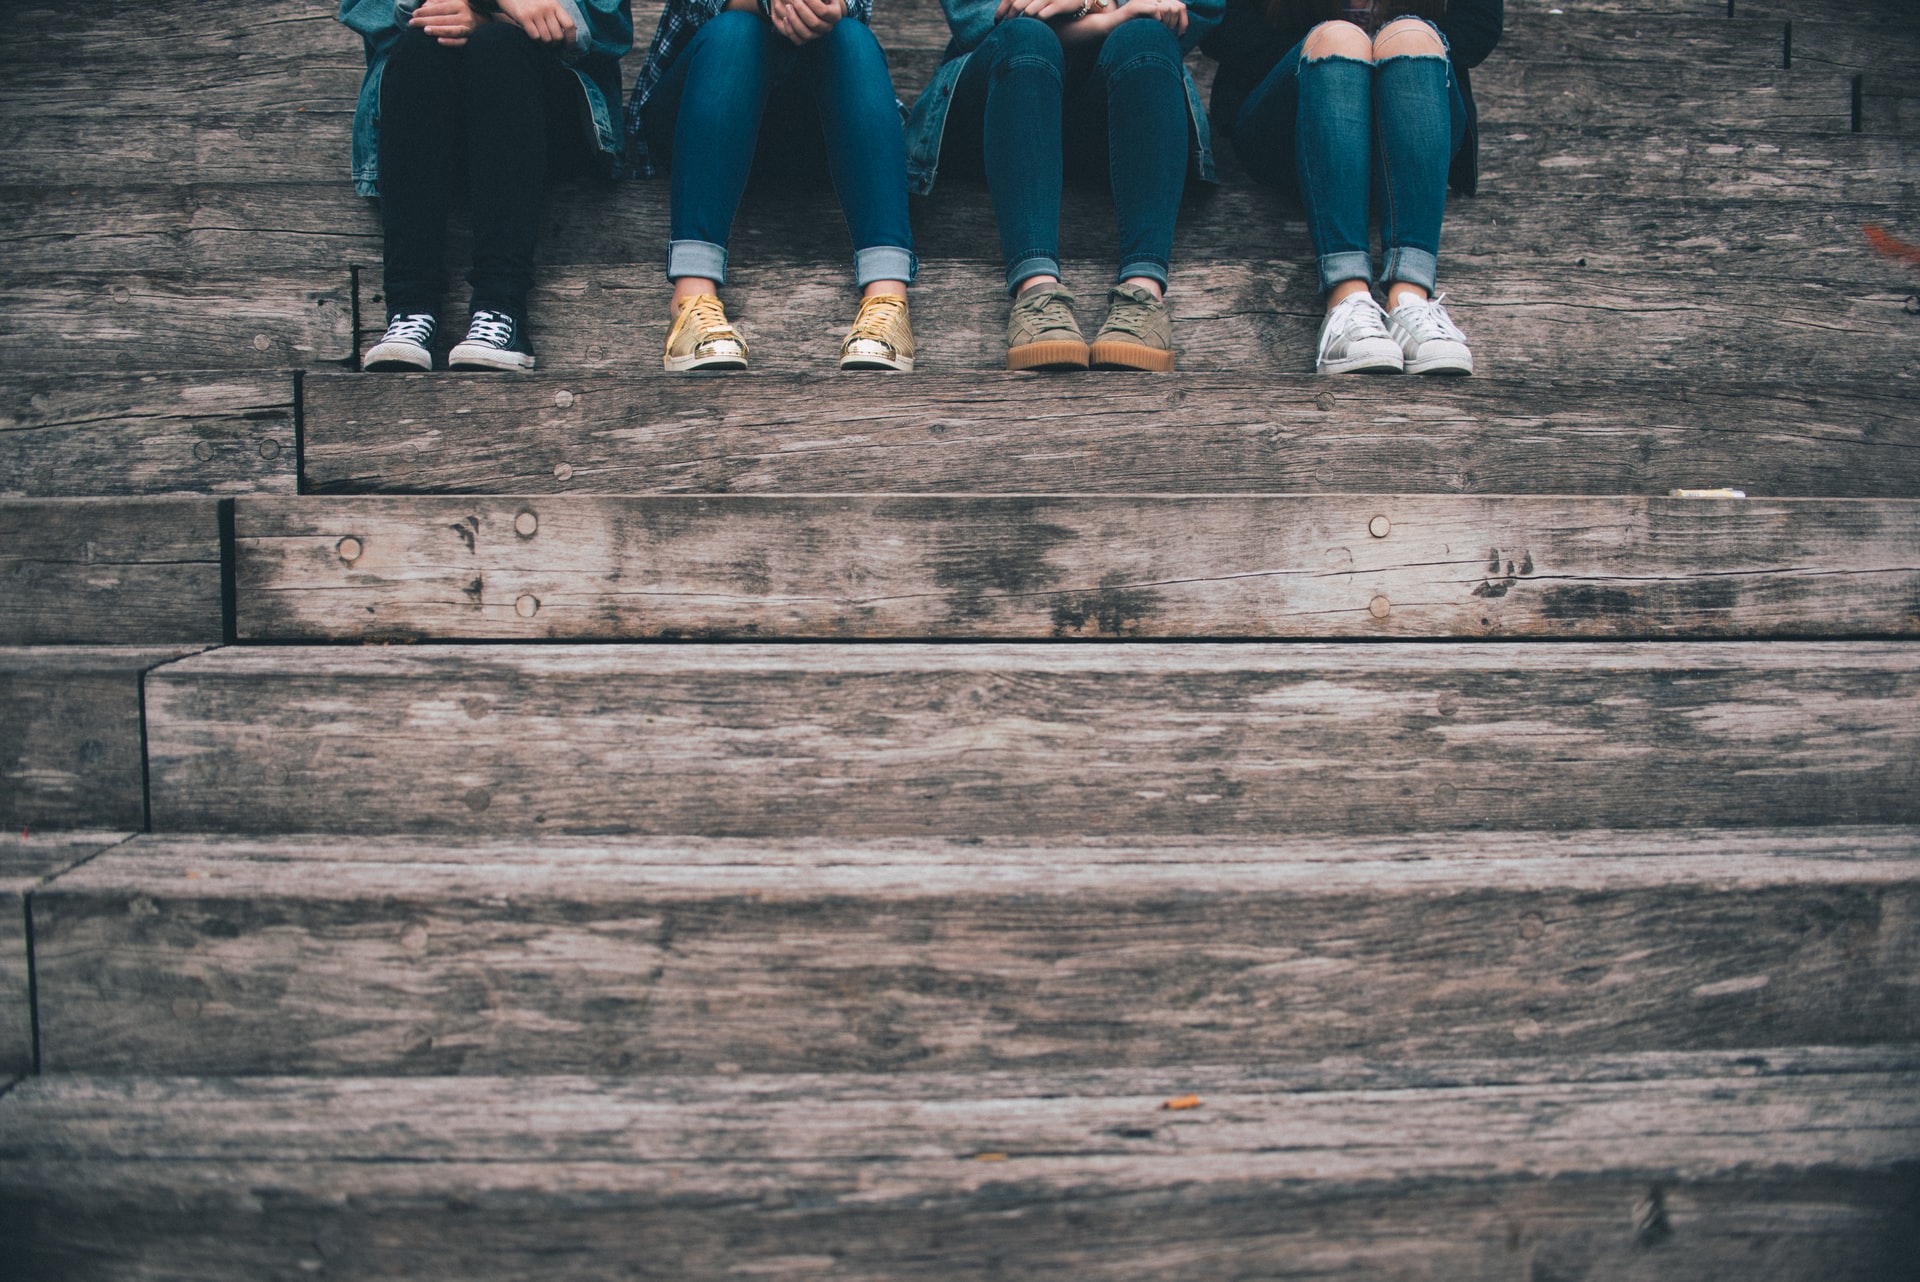 Group of 4 people sitting on stairs.